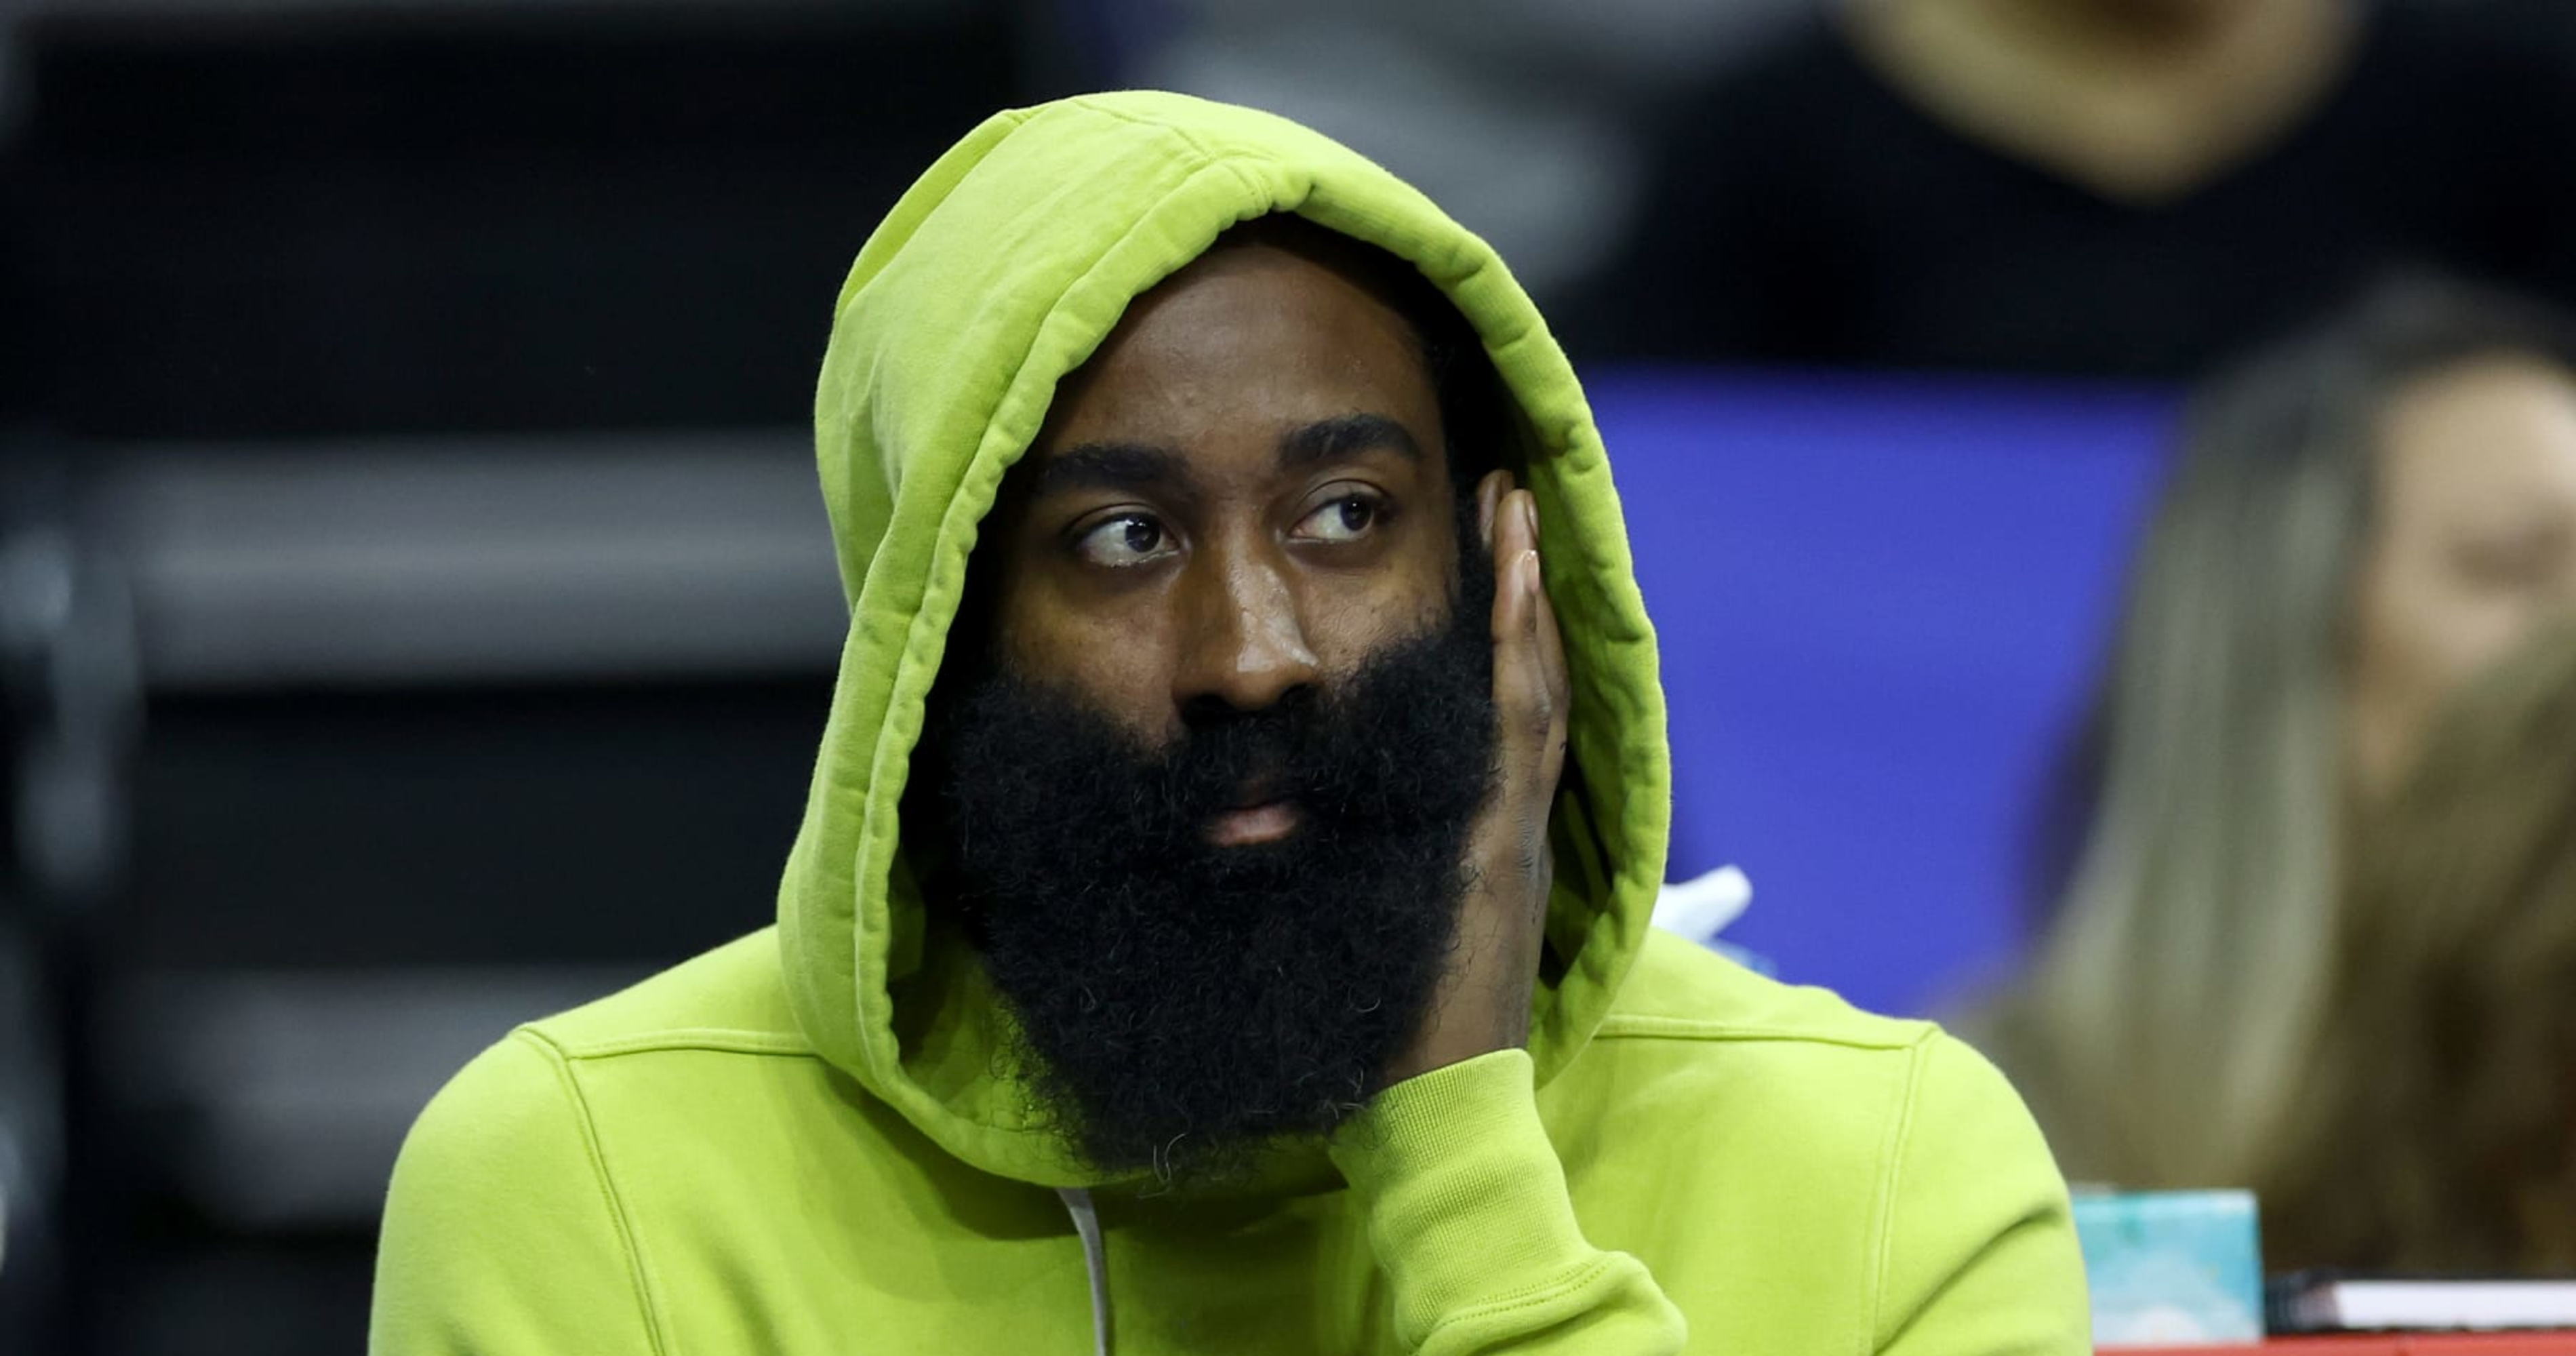 James Harden's outfit set Sixers Twitter ablaze last night. That's